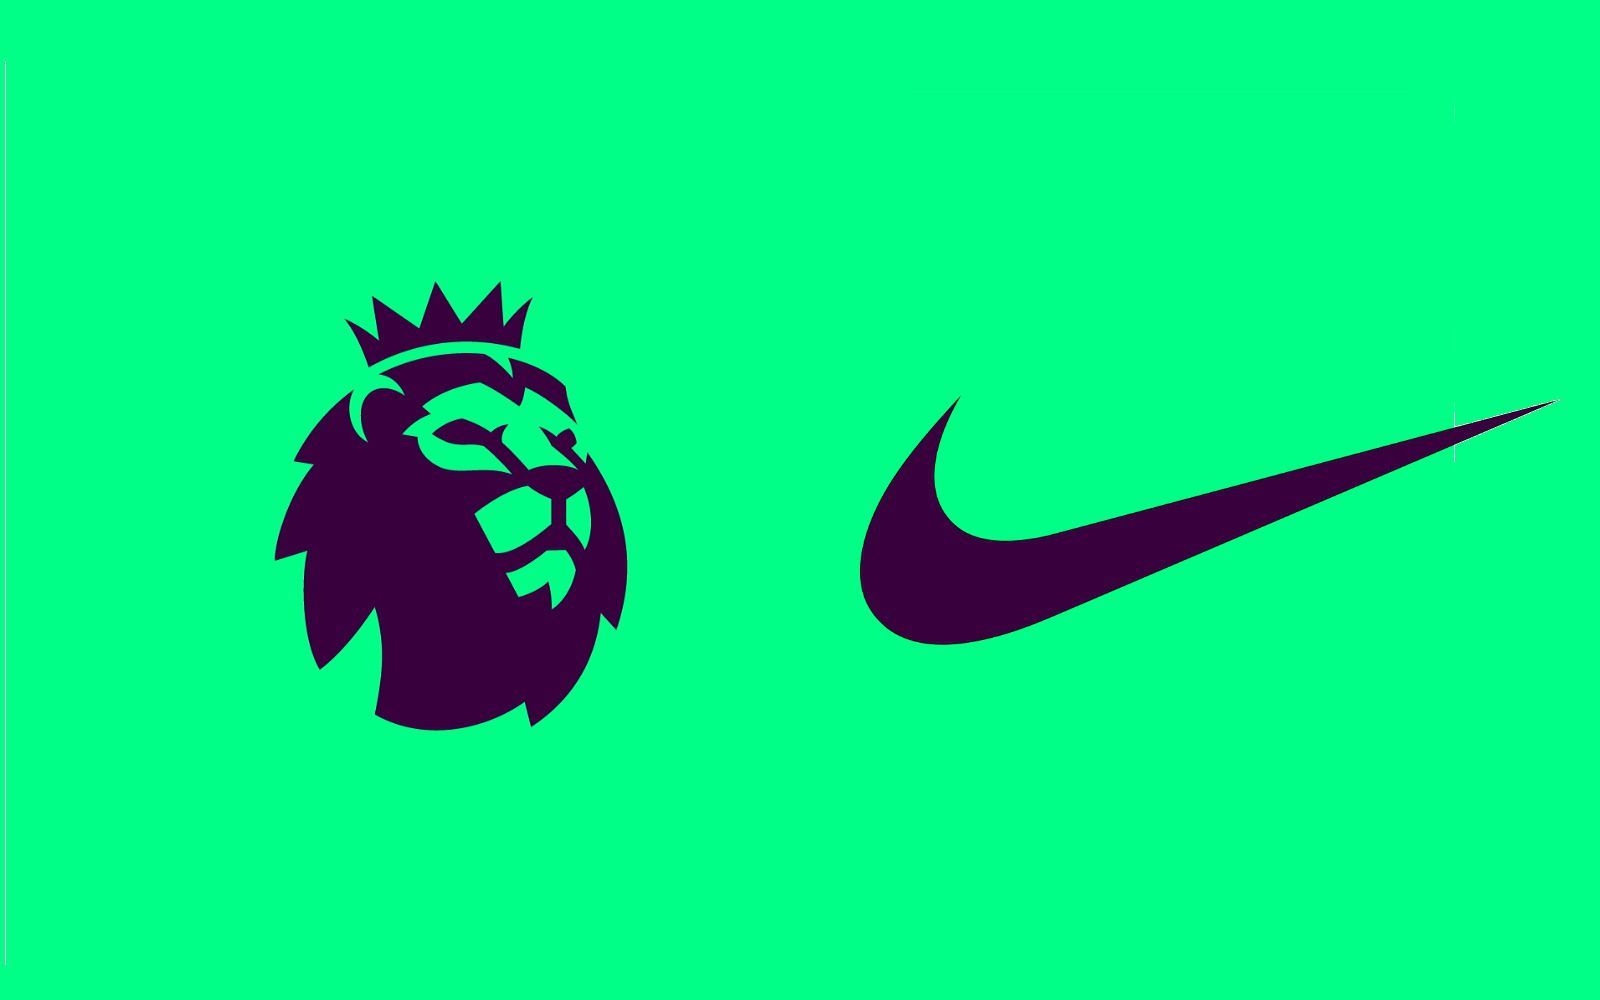 The collaboration between Nike League continues